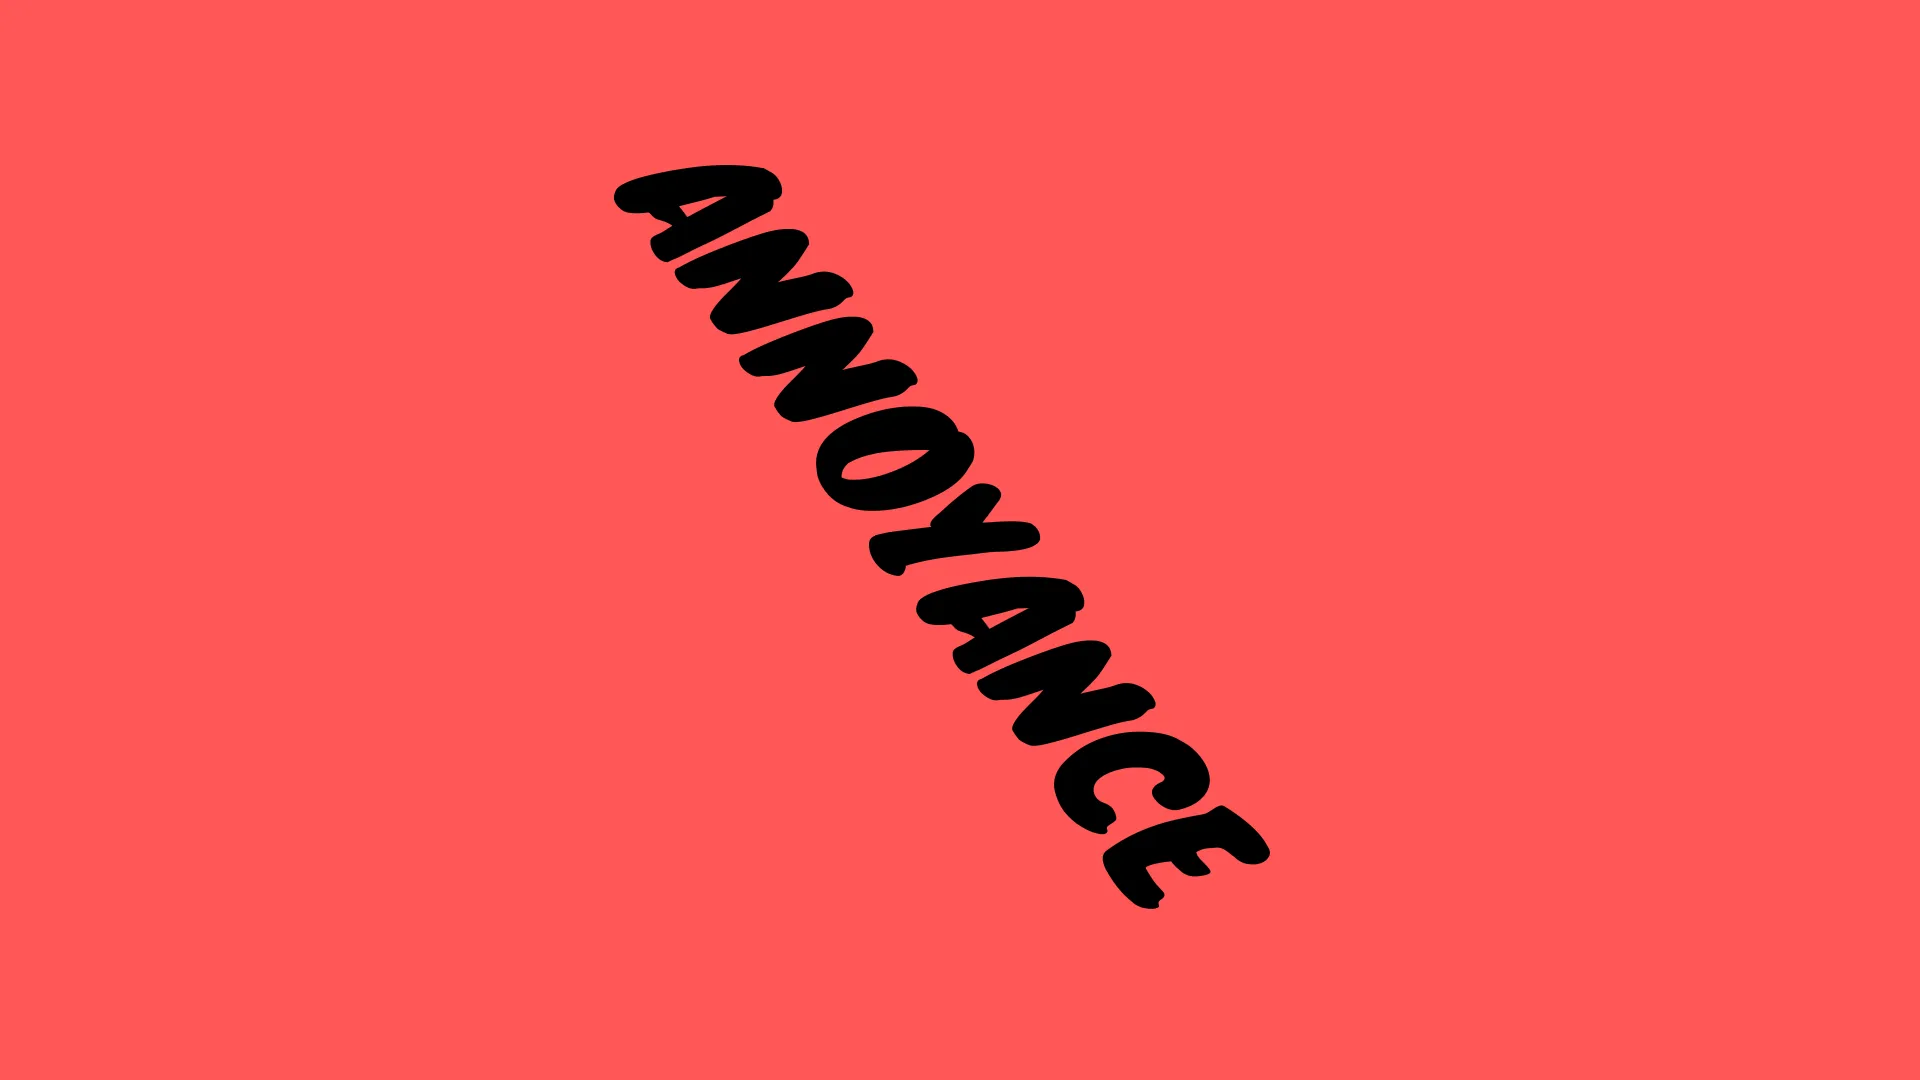 A picture with a Red-ish Orange background with black font slanting down to the left spelling out &ldquo;Annoyance&rdquo;